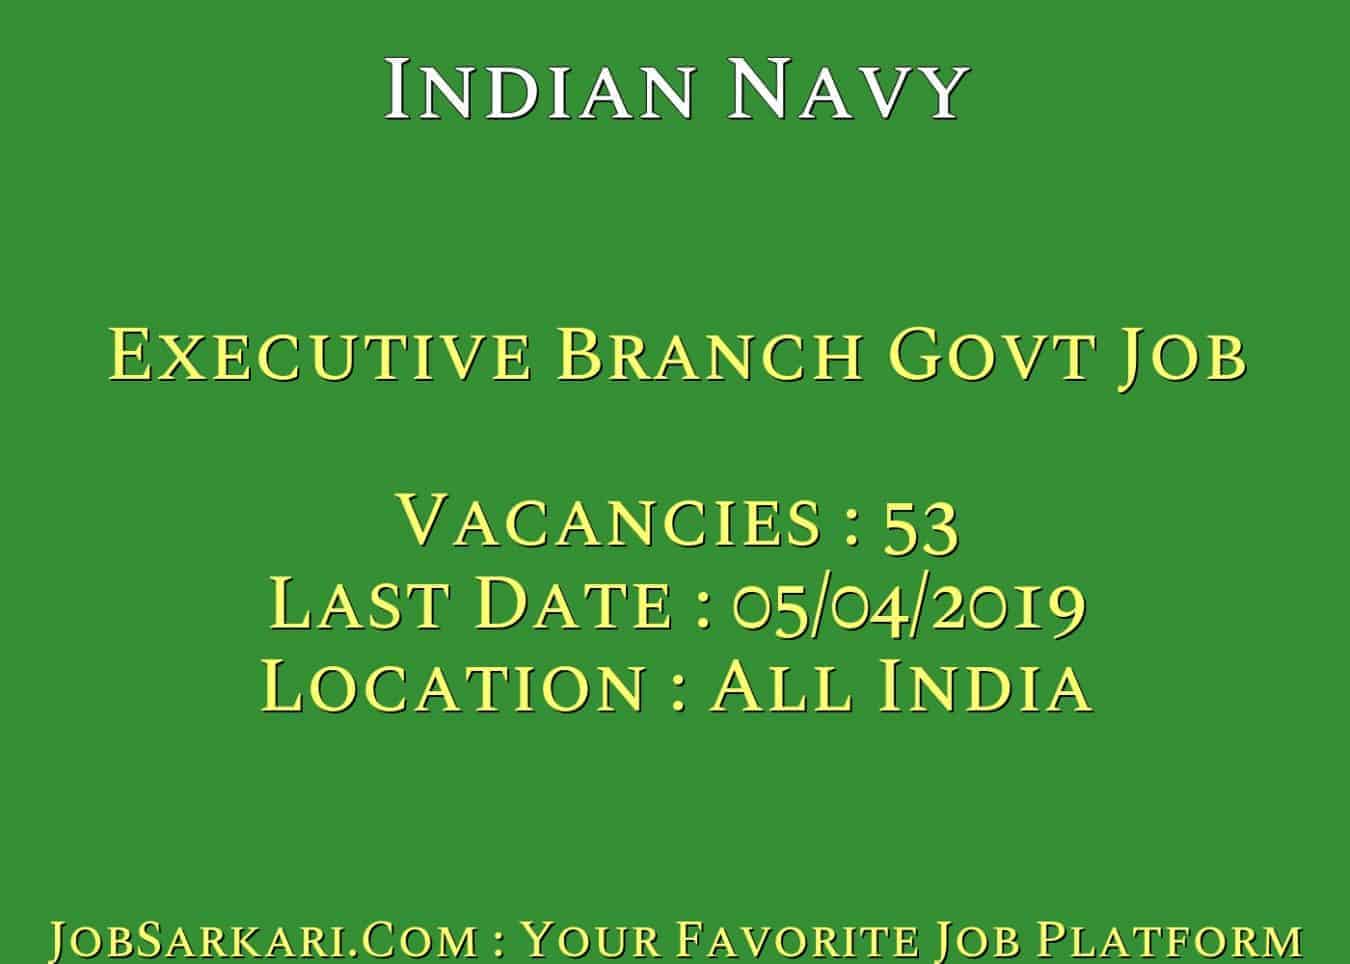 Indian Navy Recruitment 2019 For SSC in Executive Branch Govt Job